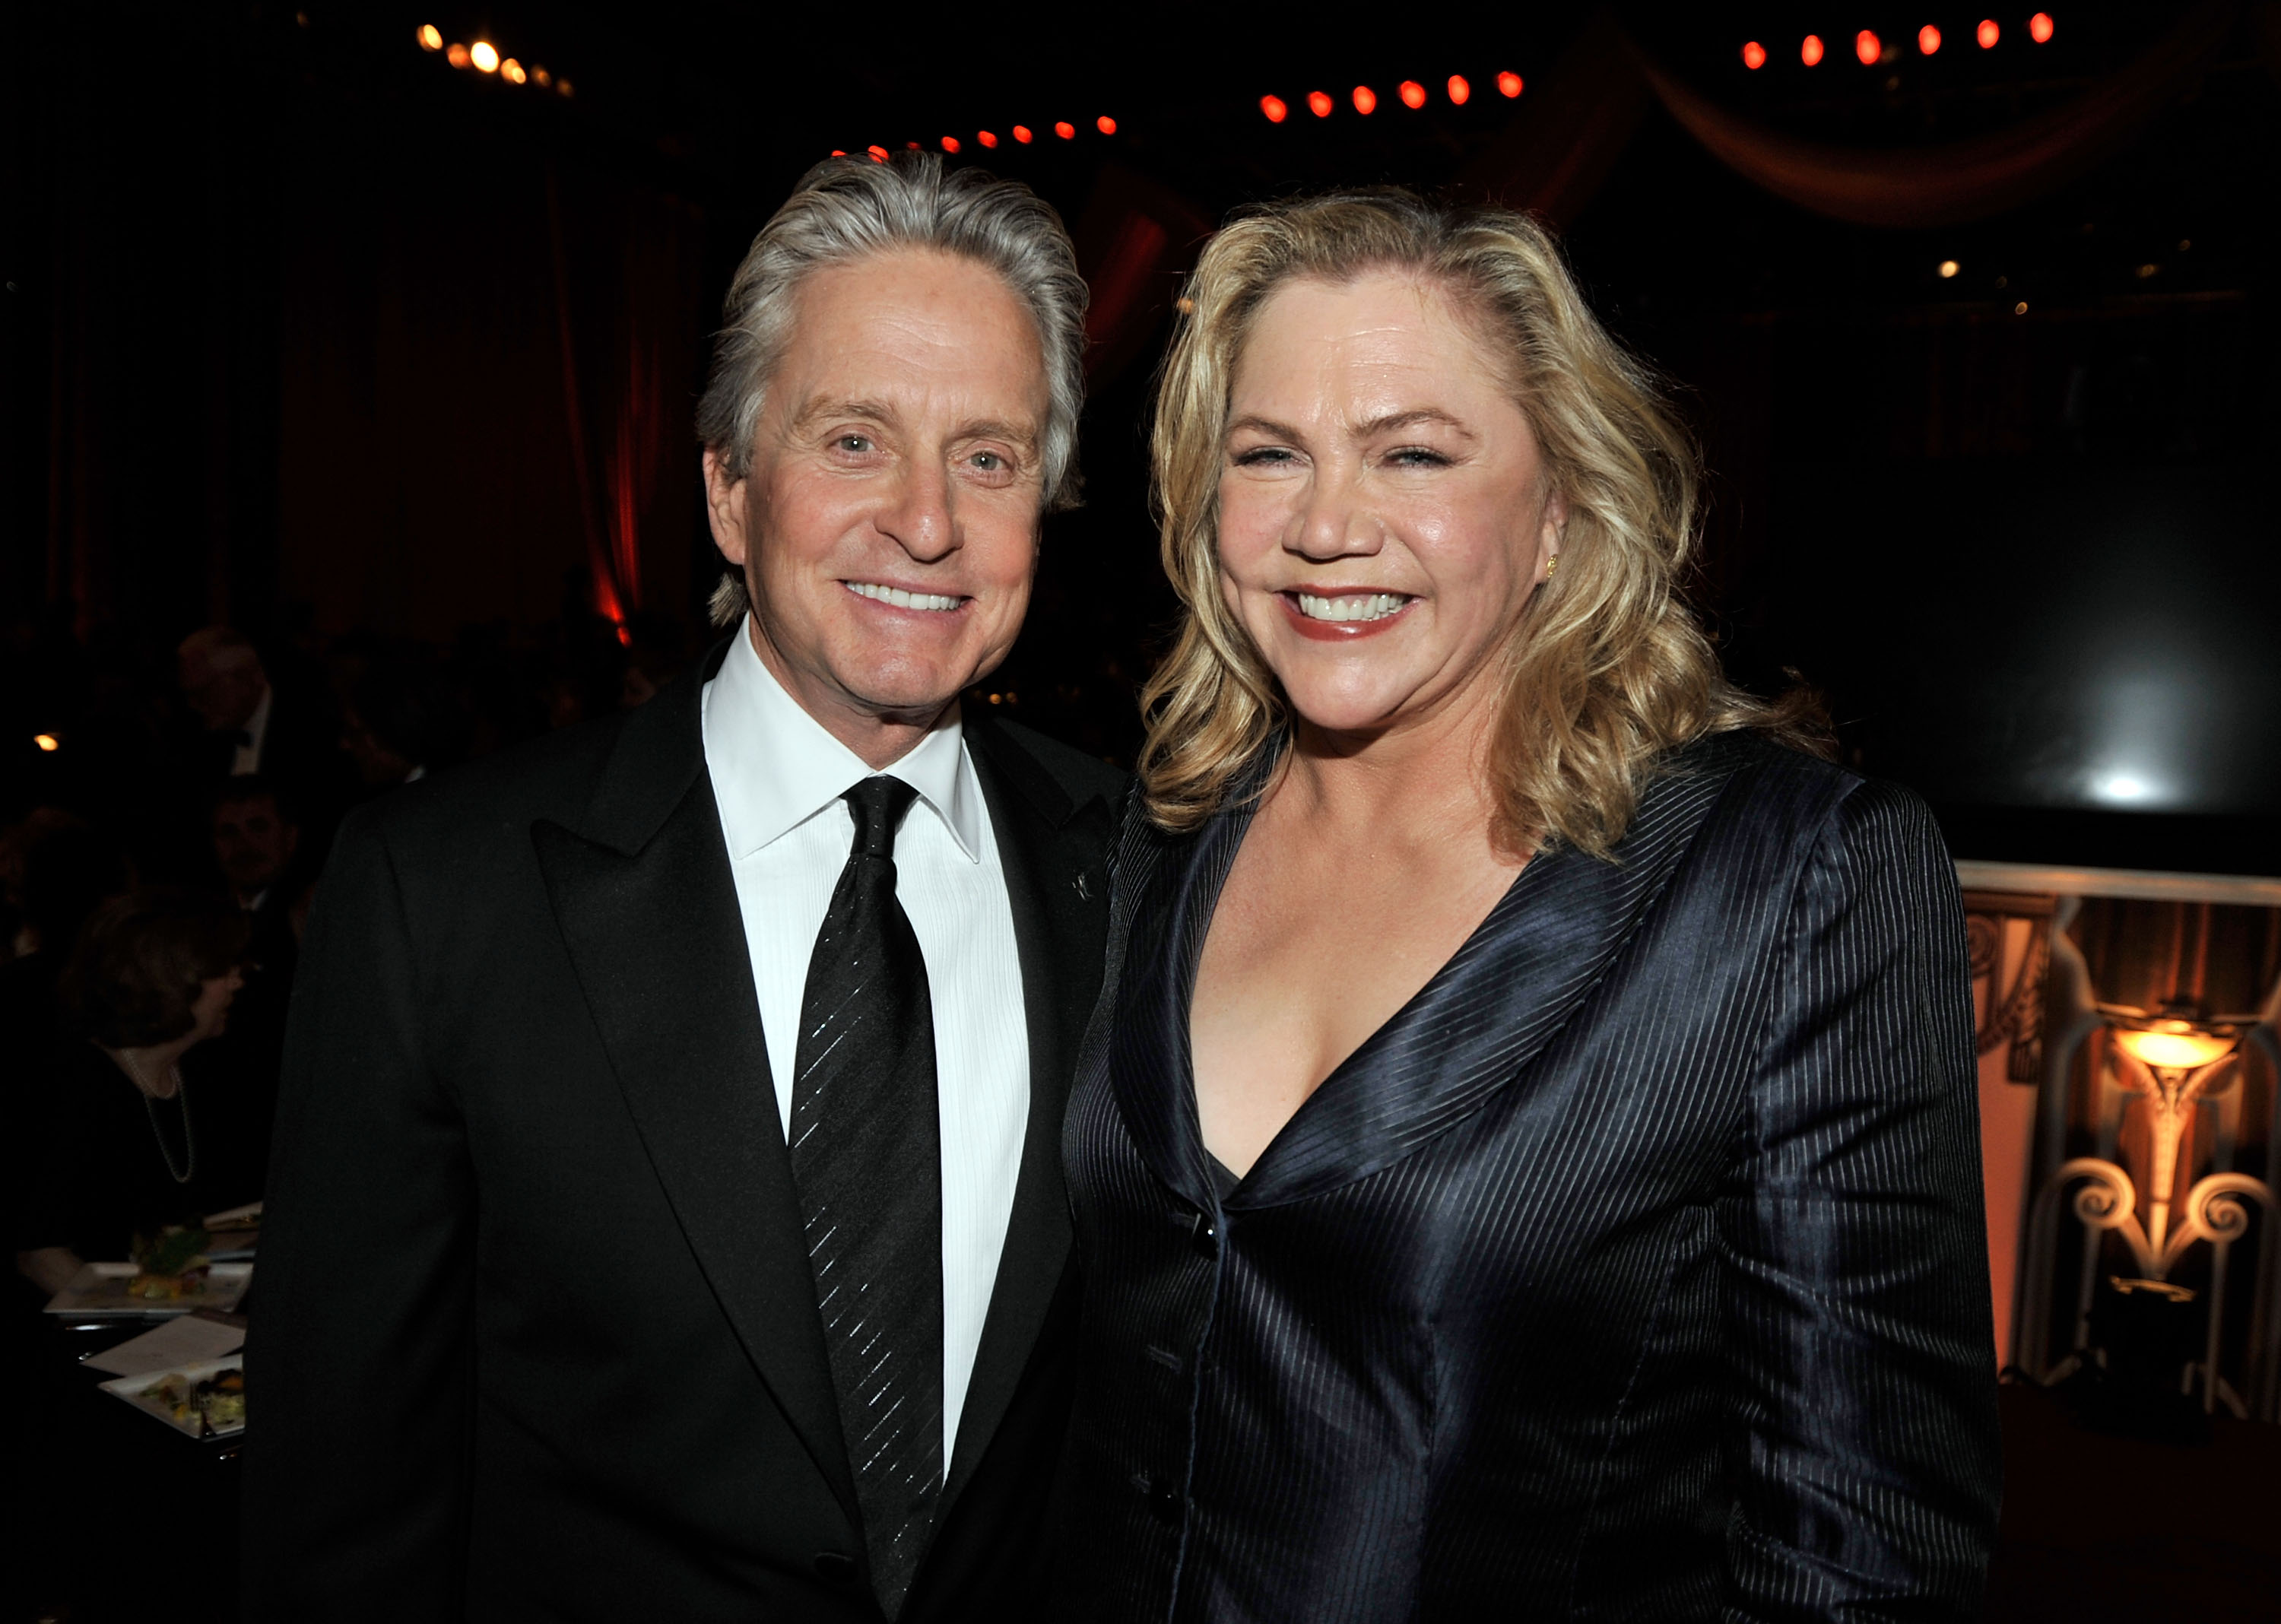 Michael Douglas and Kathleen Turner at the 37th AFI Life Achievement Award ceremony in Culver City, California on June 11, 2009 | Source: Getty Images